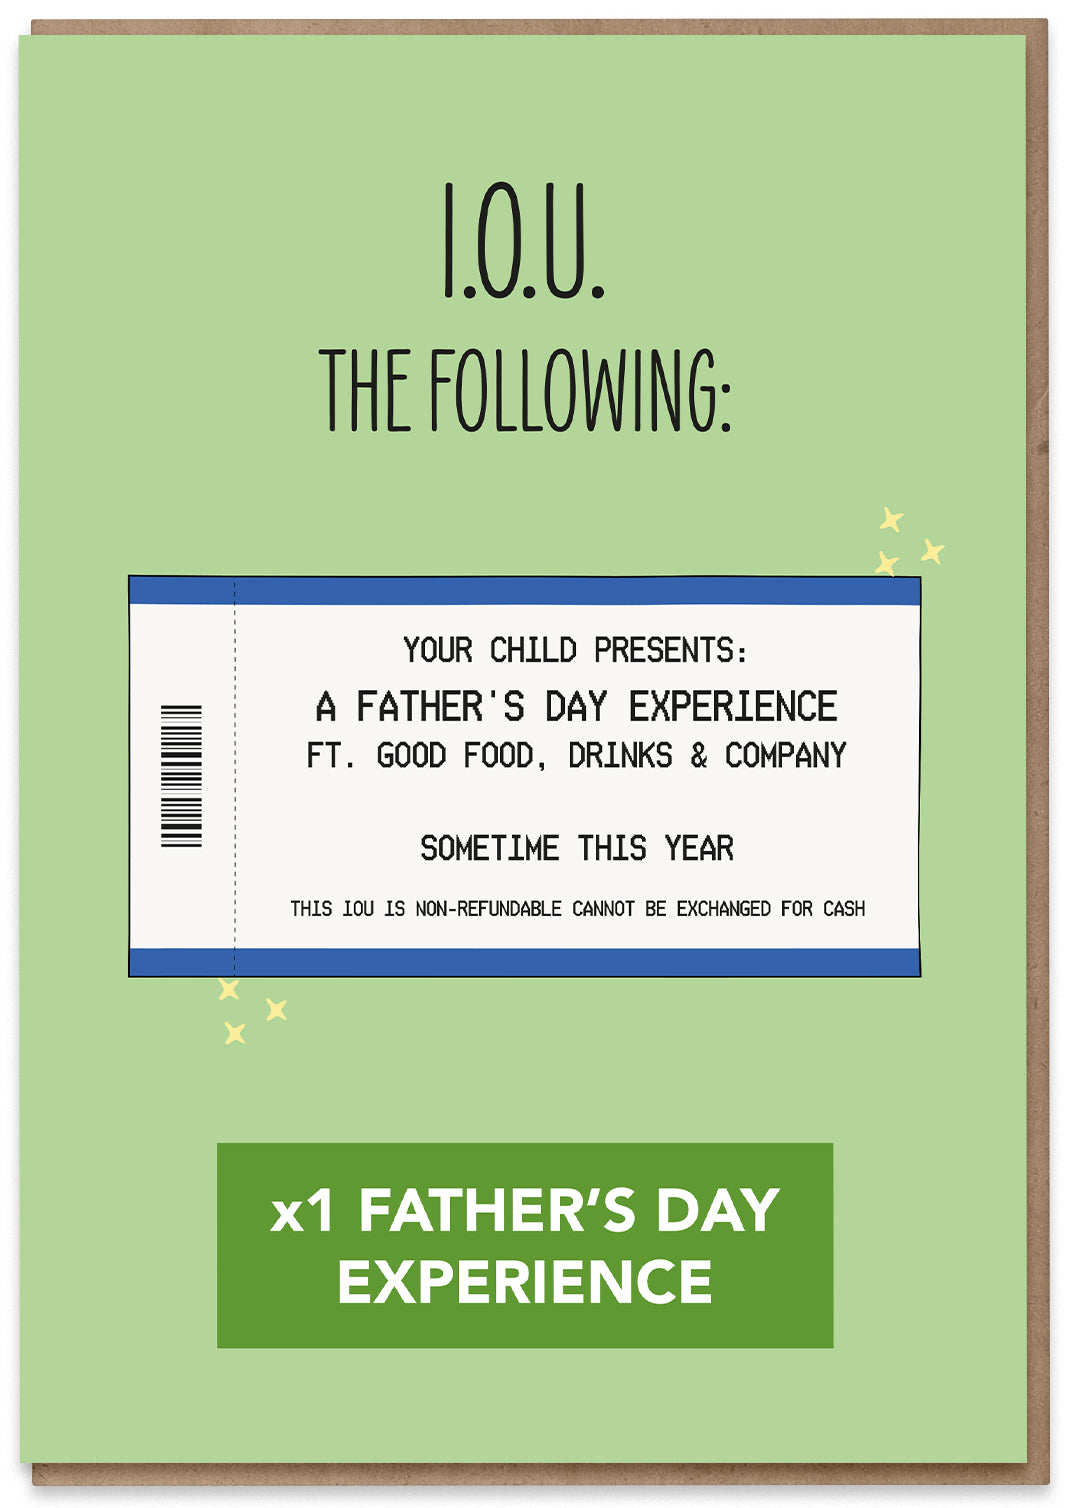 IOU: x1 Father's Day Experience